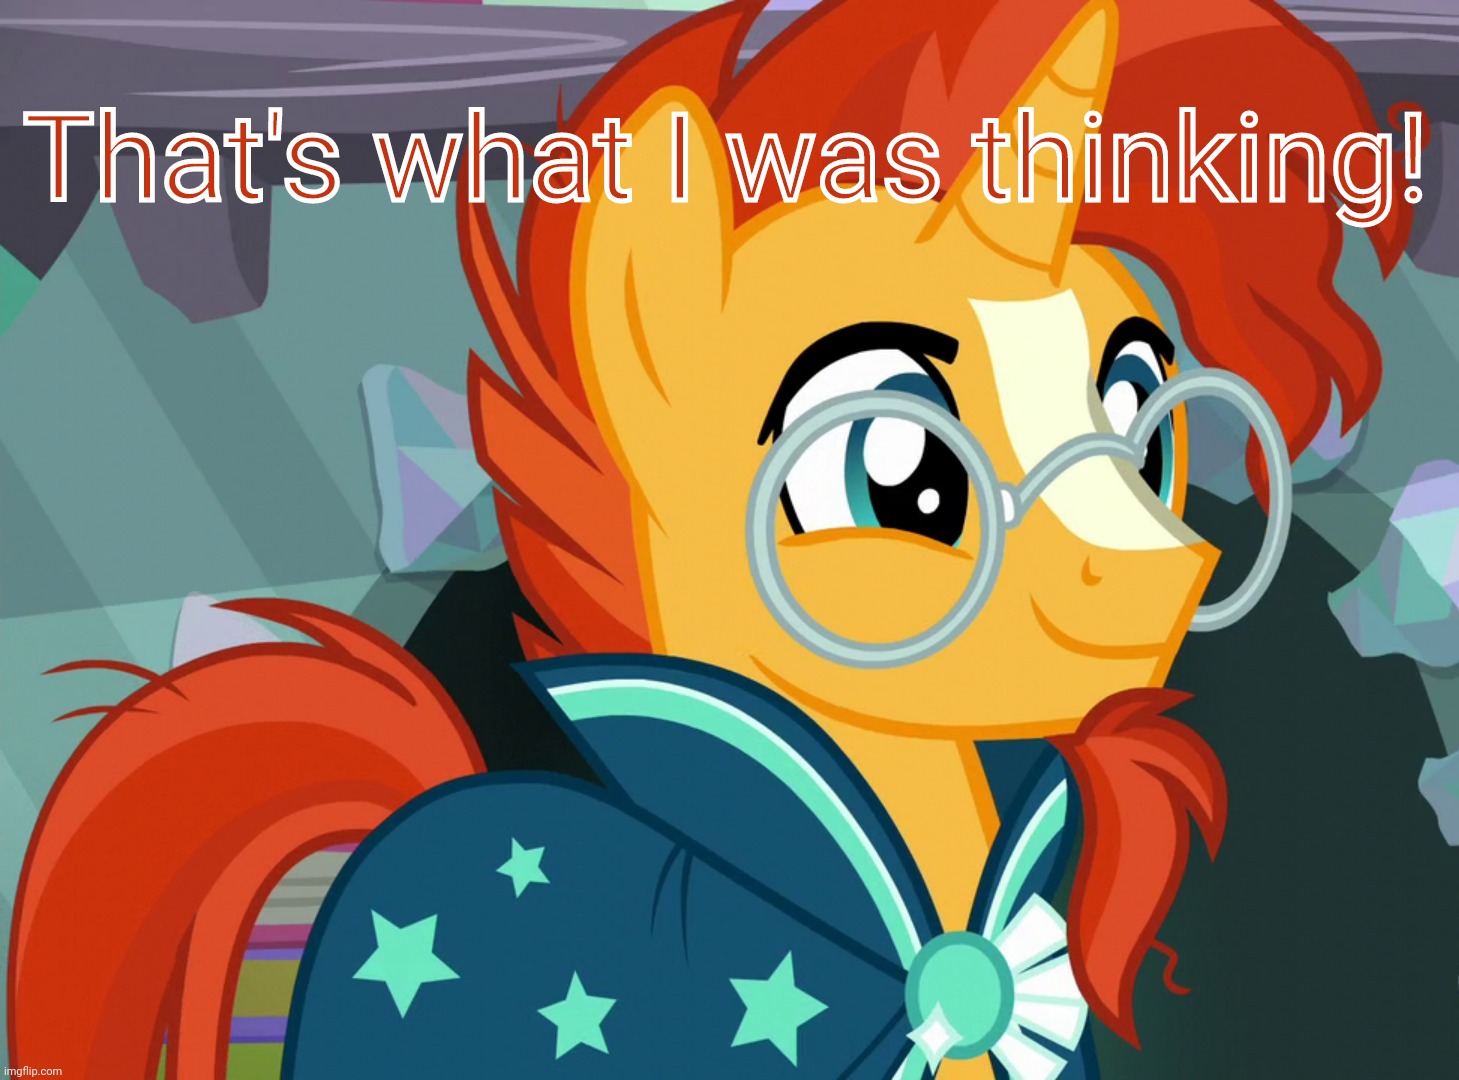 Happy Sunburst (MLP) | That's what I was thinking! | image tagged in happy sunburst mlp | made w/ Imgflip meme maker